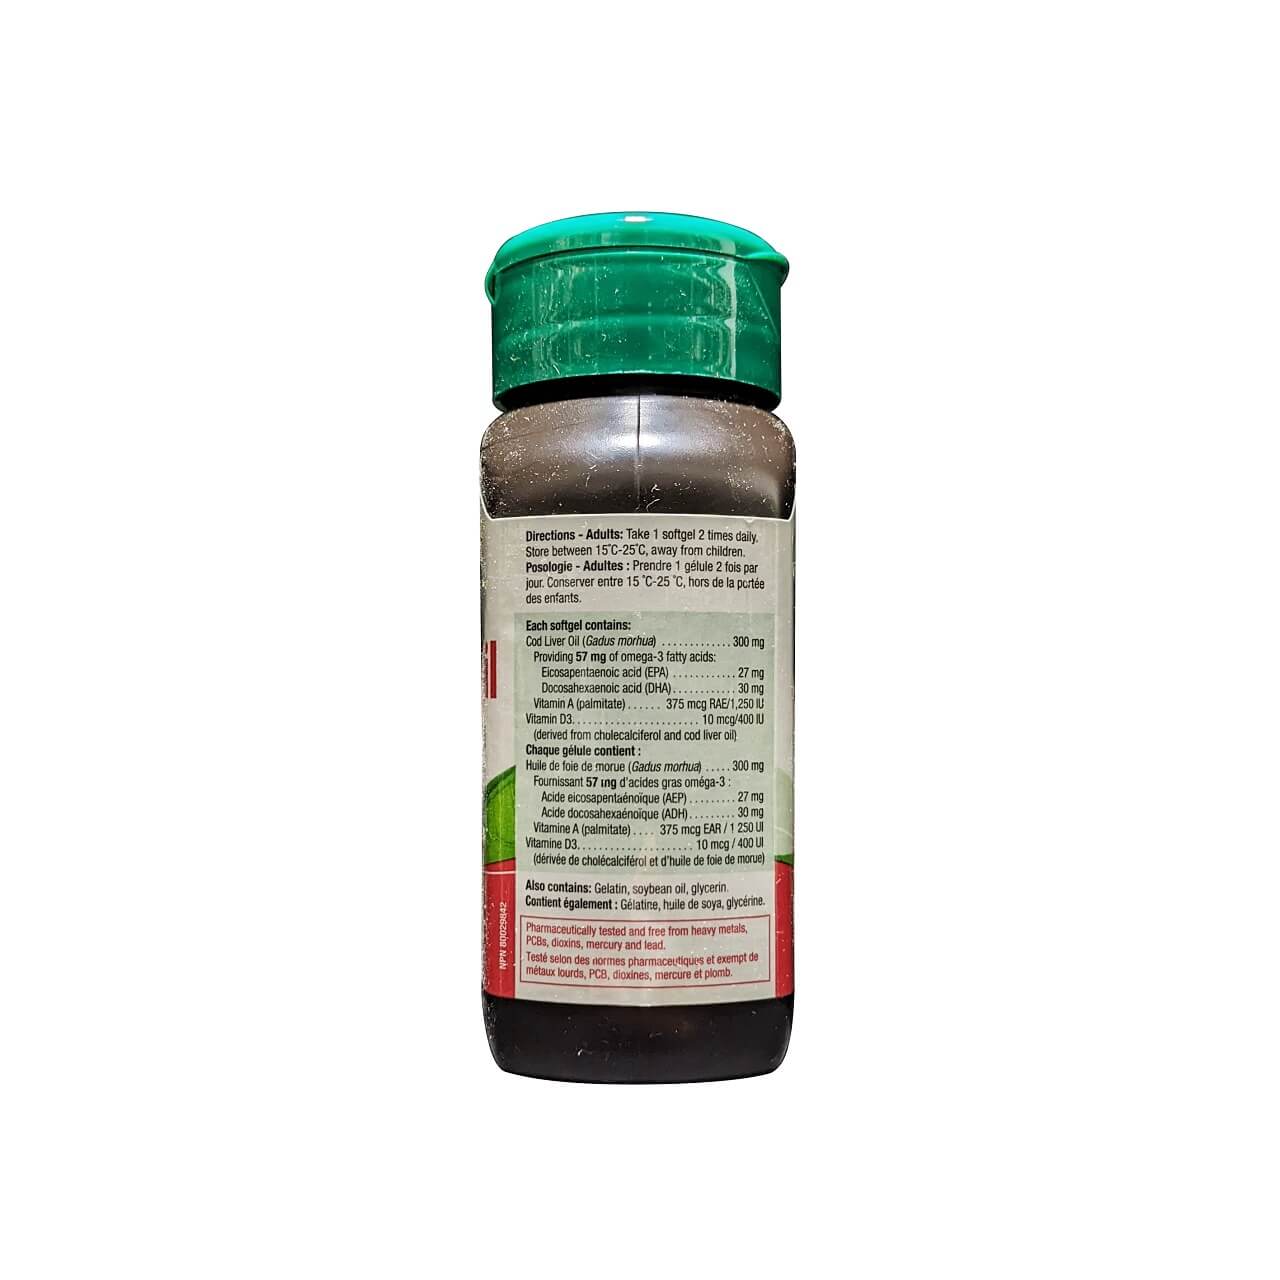 Directions and ingredients for Jamieson Cod Liver Oil with Vitamin A (1250 IU) and D3 (400 IU) (100 softgels)